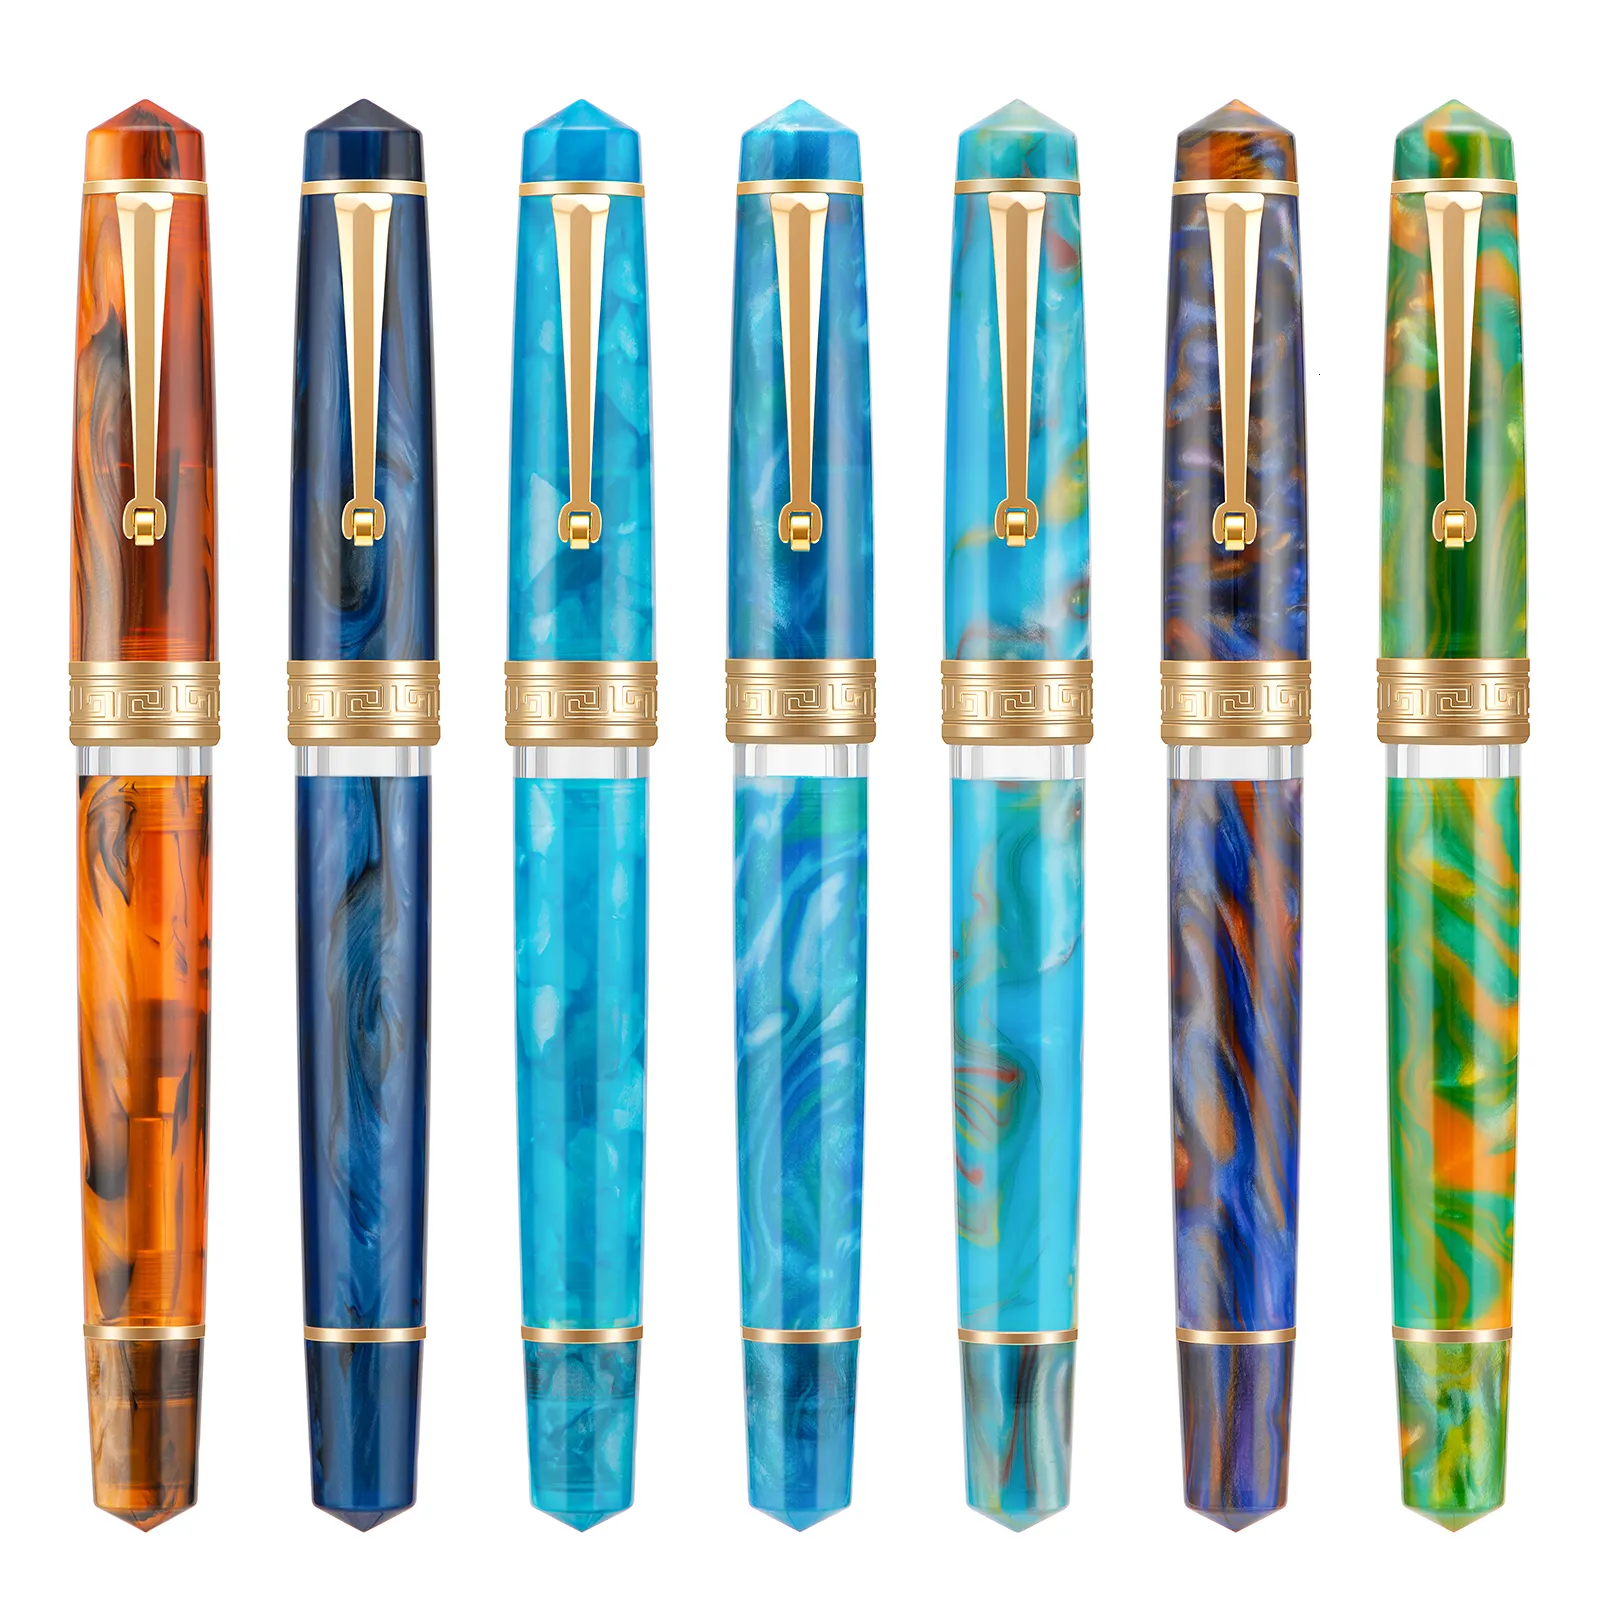 Fountain Pens Asvine P20 Piston Filling Fountain Pen Acrylic Beautiful Patterns EFFM Nib with Golden Clip Smooth Writing Office Gift Pen 230804